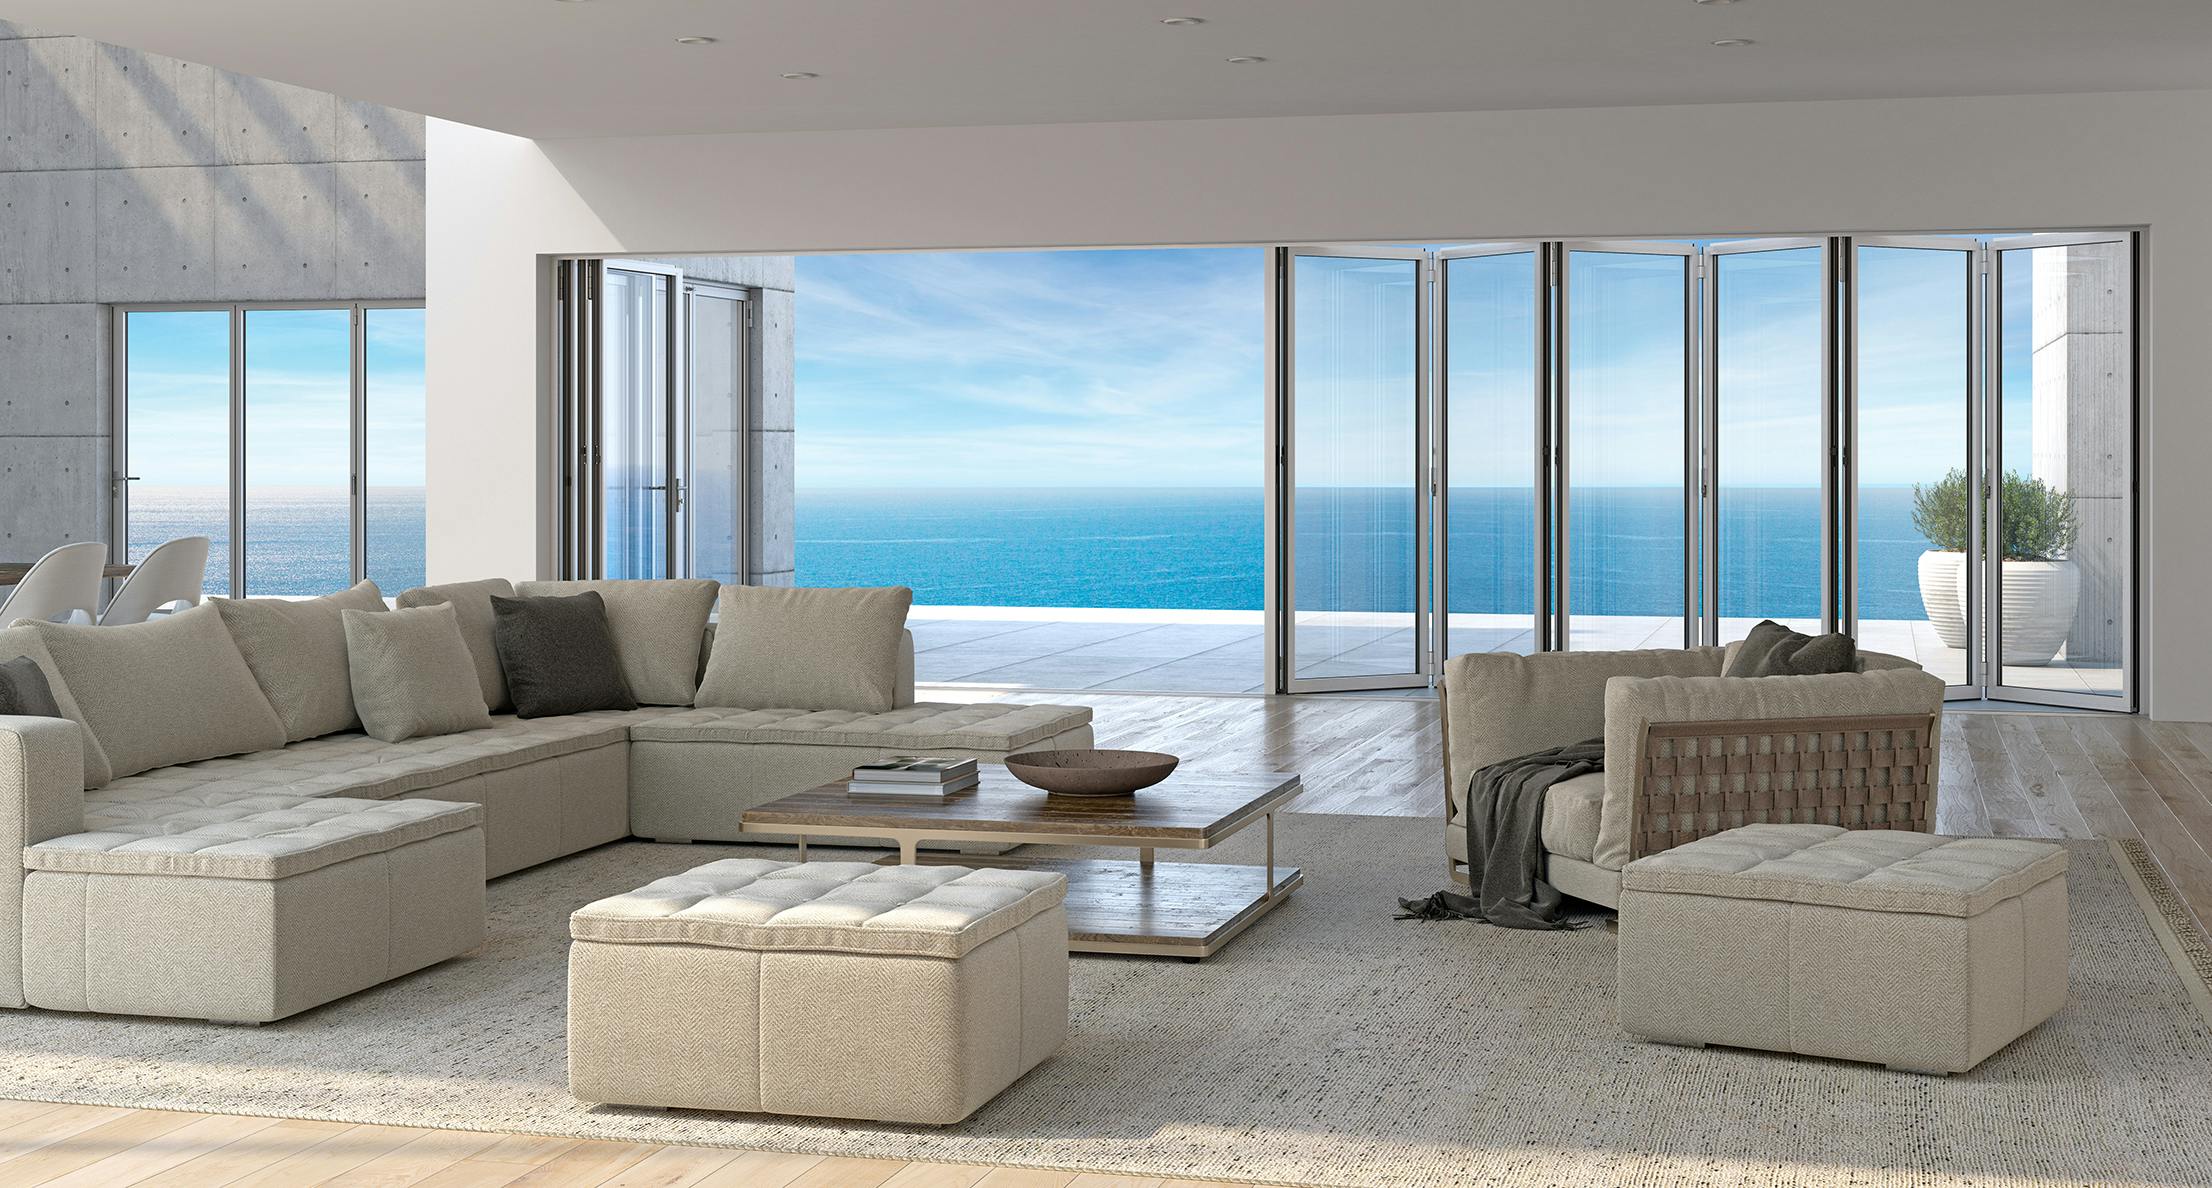 Modern  Living Room with Folding Glass Walls and a View of the Ocean